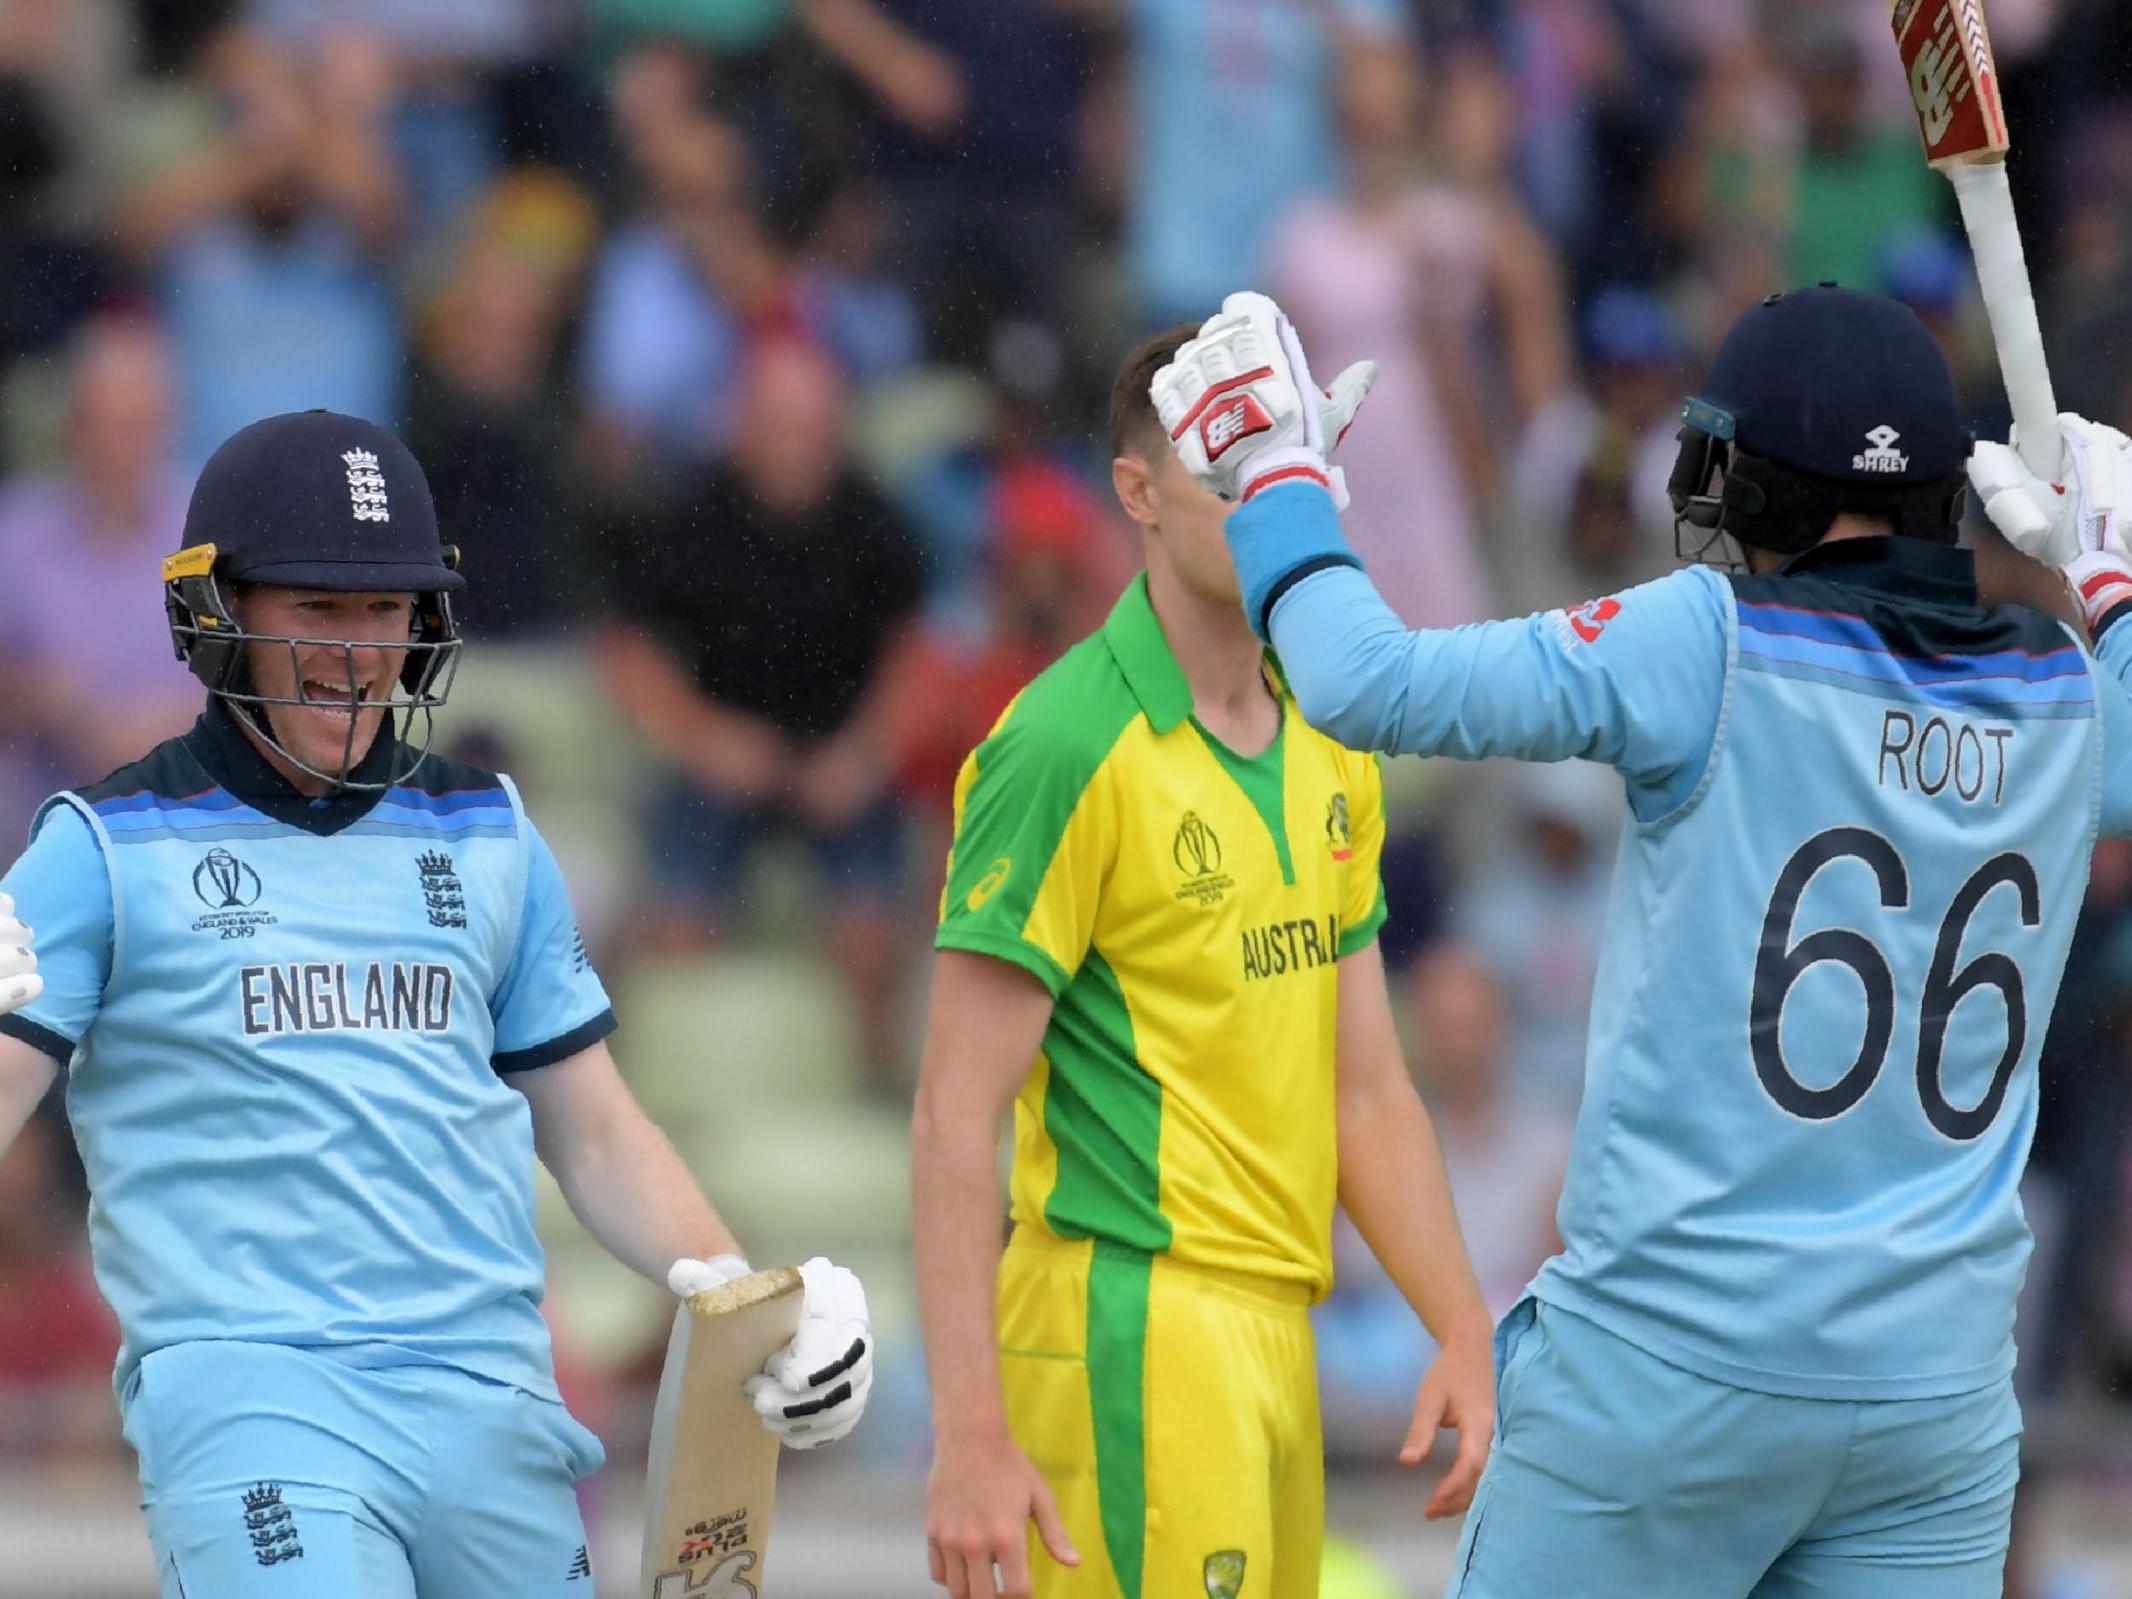 Cricket World Cup 2019: Eoin Morgan warns England against complacency ahead of final against New Zealand